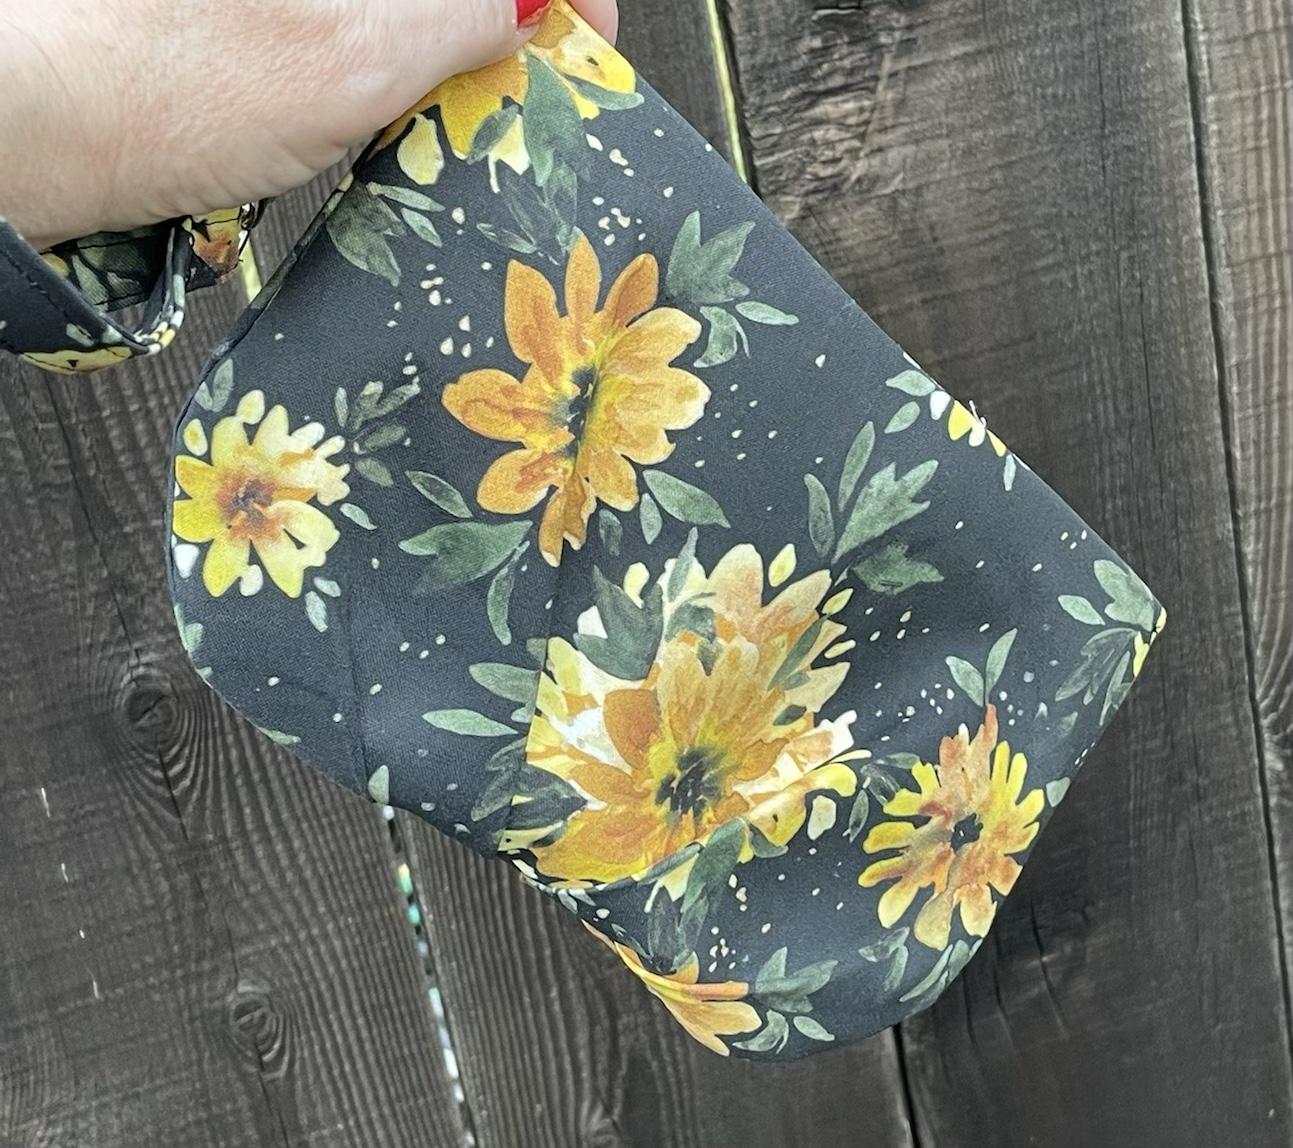 Pleated yellow & black floral wristlet clutch purse, recessed zipper top, removable swivel wrist strap, cosmetic bag, make up pouch, bridesmaid gift, garden wedding